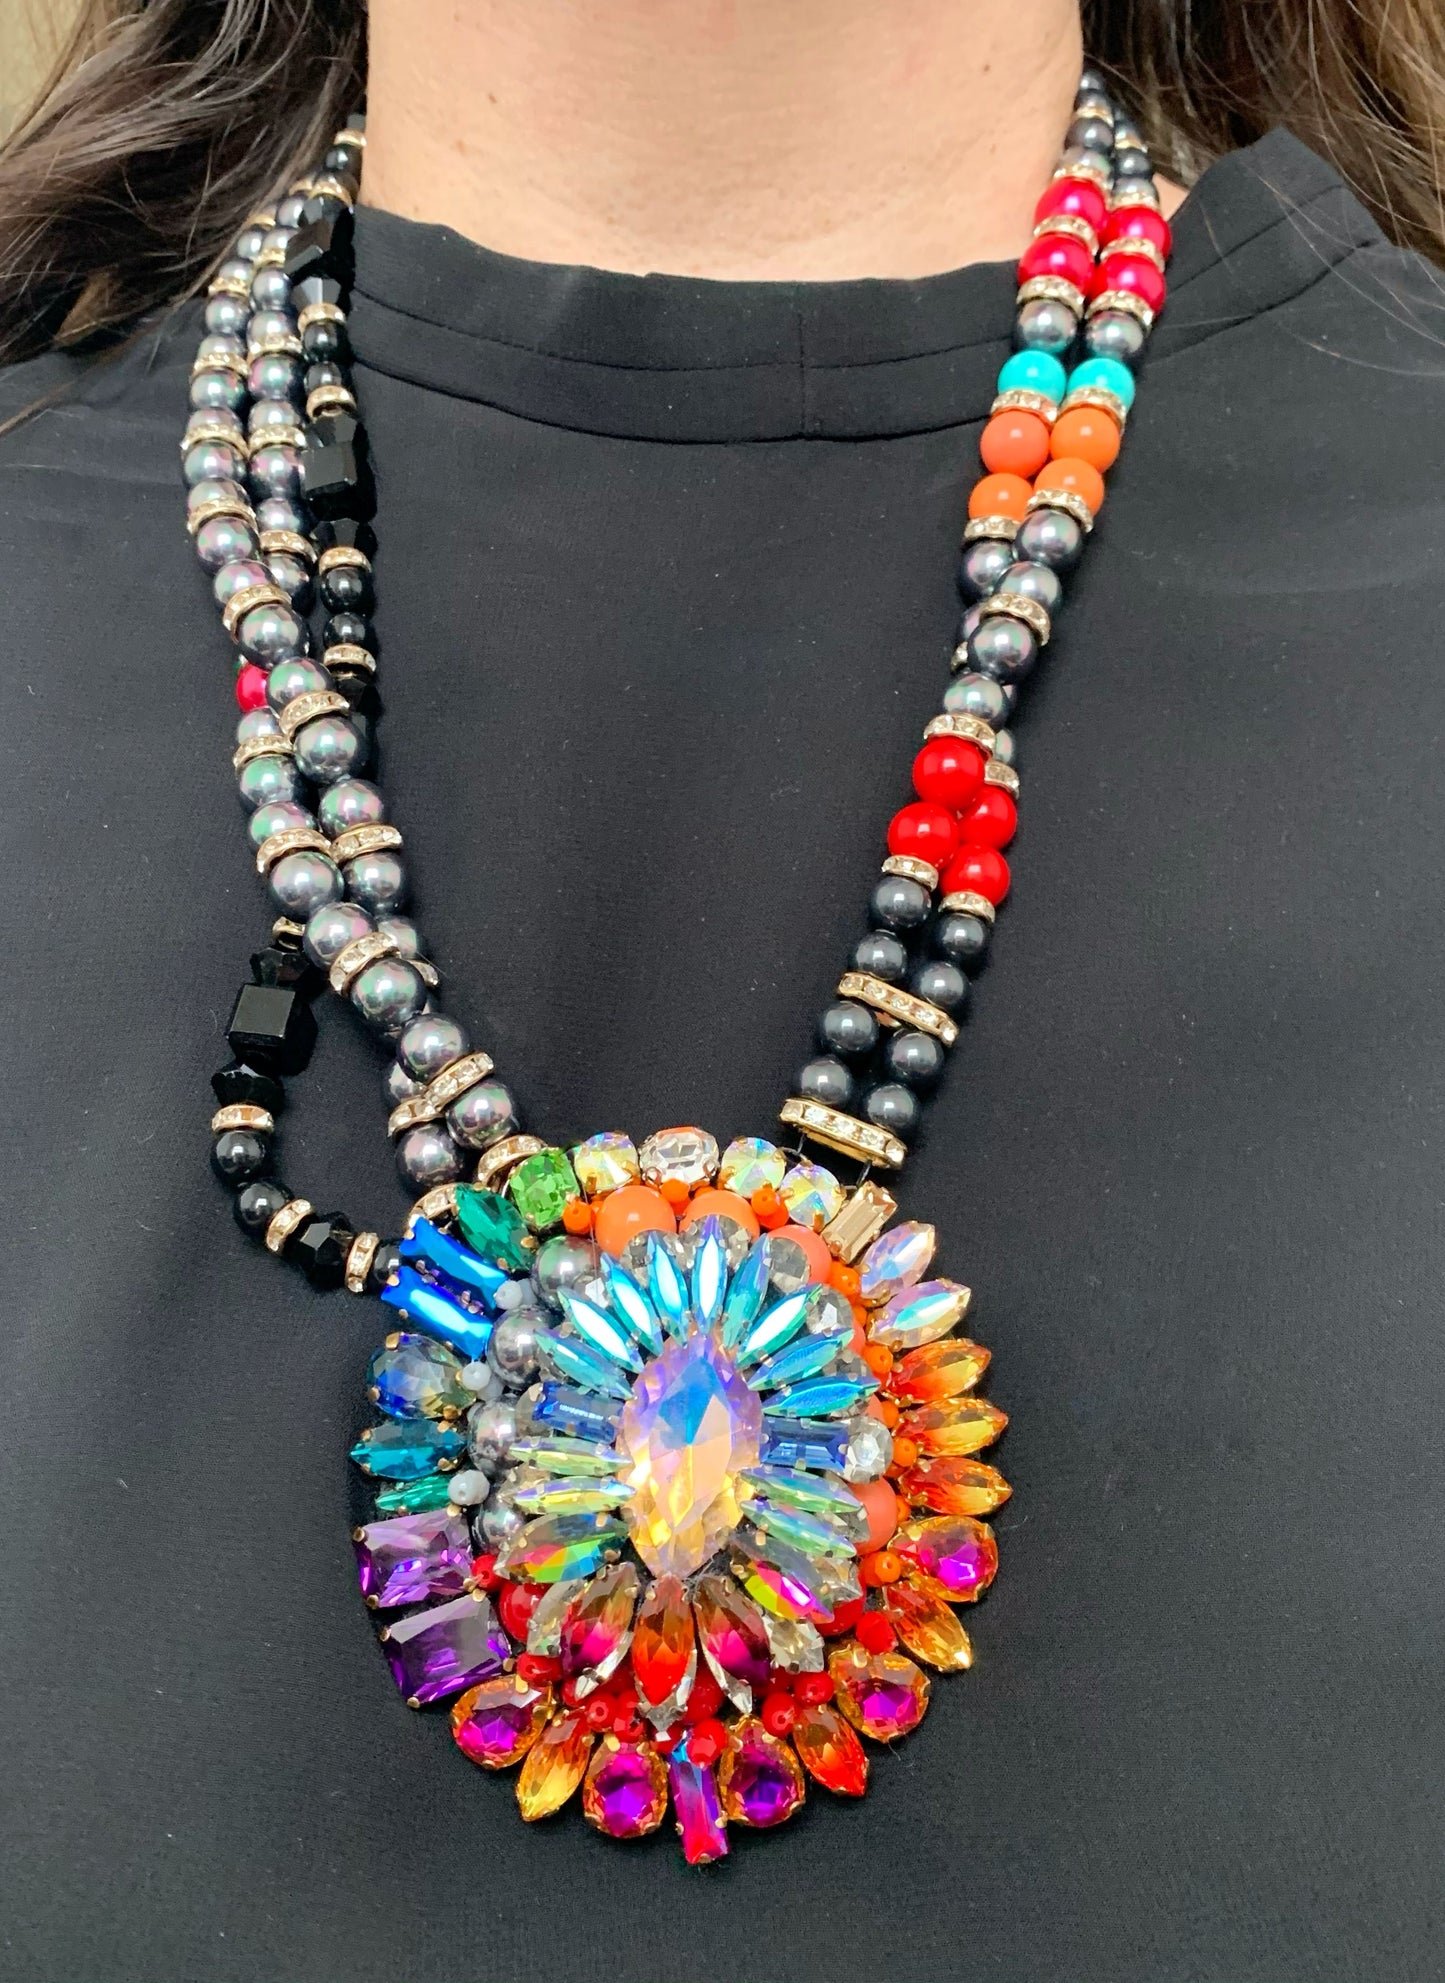 Francine pearl necklace with rainbow pendant